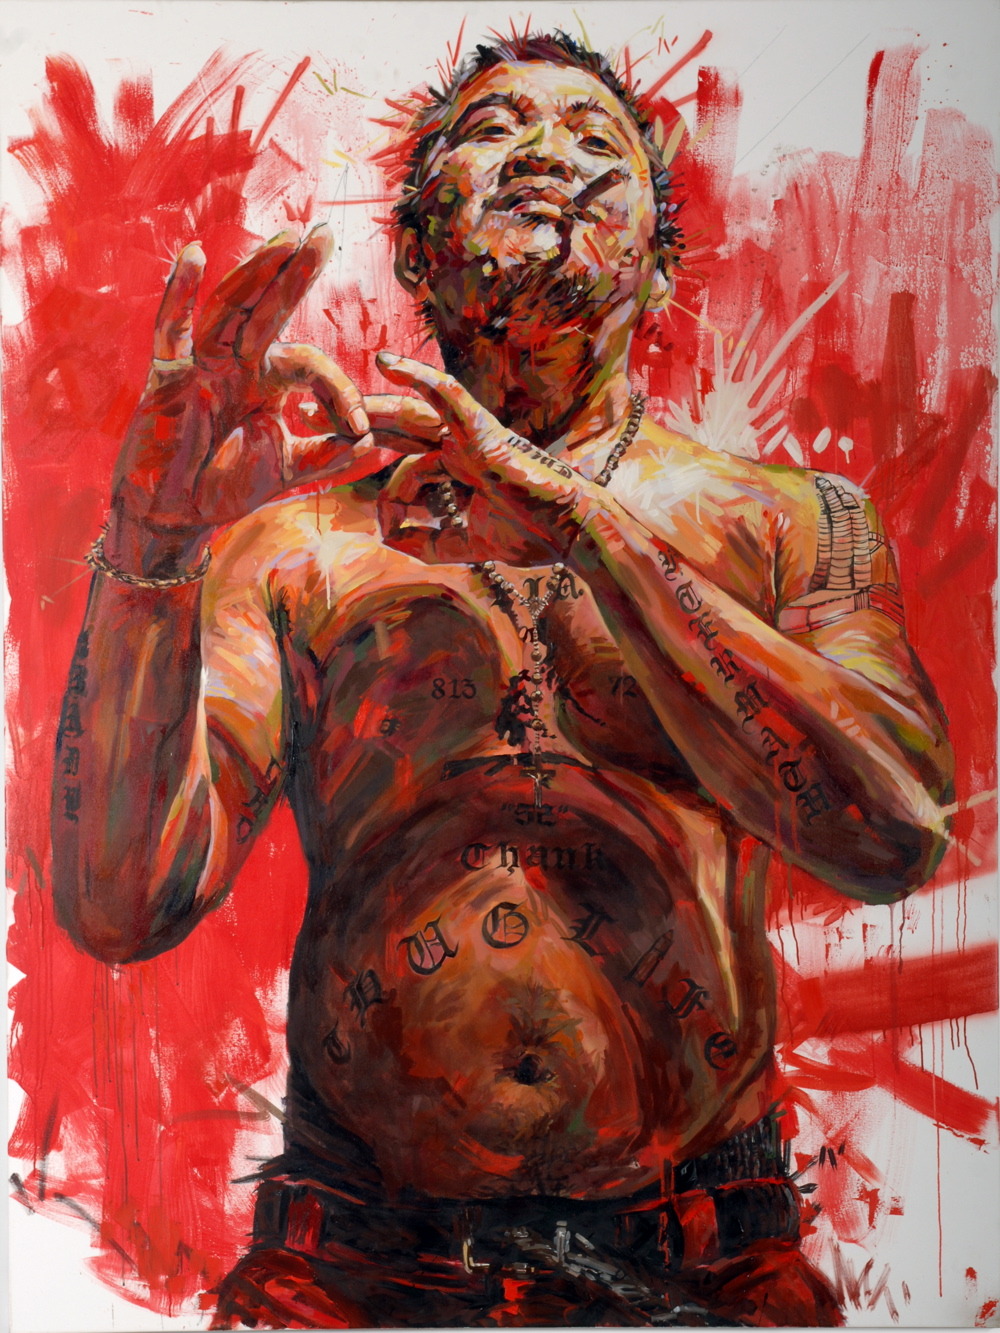  MICHAEL VASQUEZ  "Friendly Fatherly Figures - Bloody Buddy Row" 2006  acrylic, oil, and spray paint on canvas  96 x 72"    